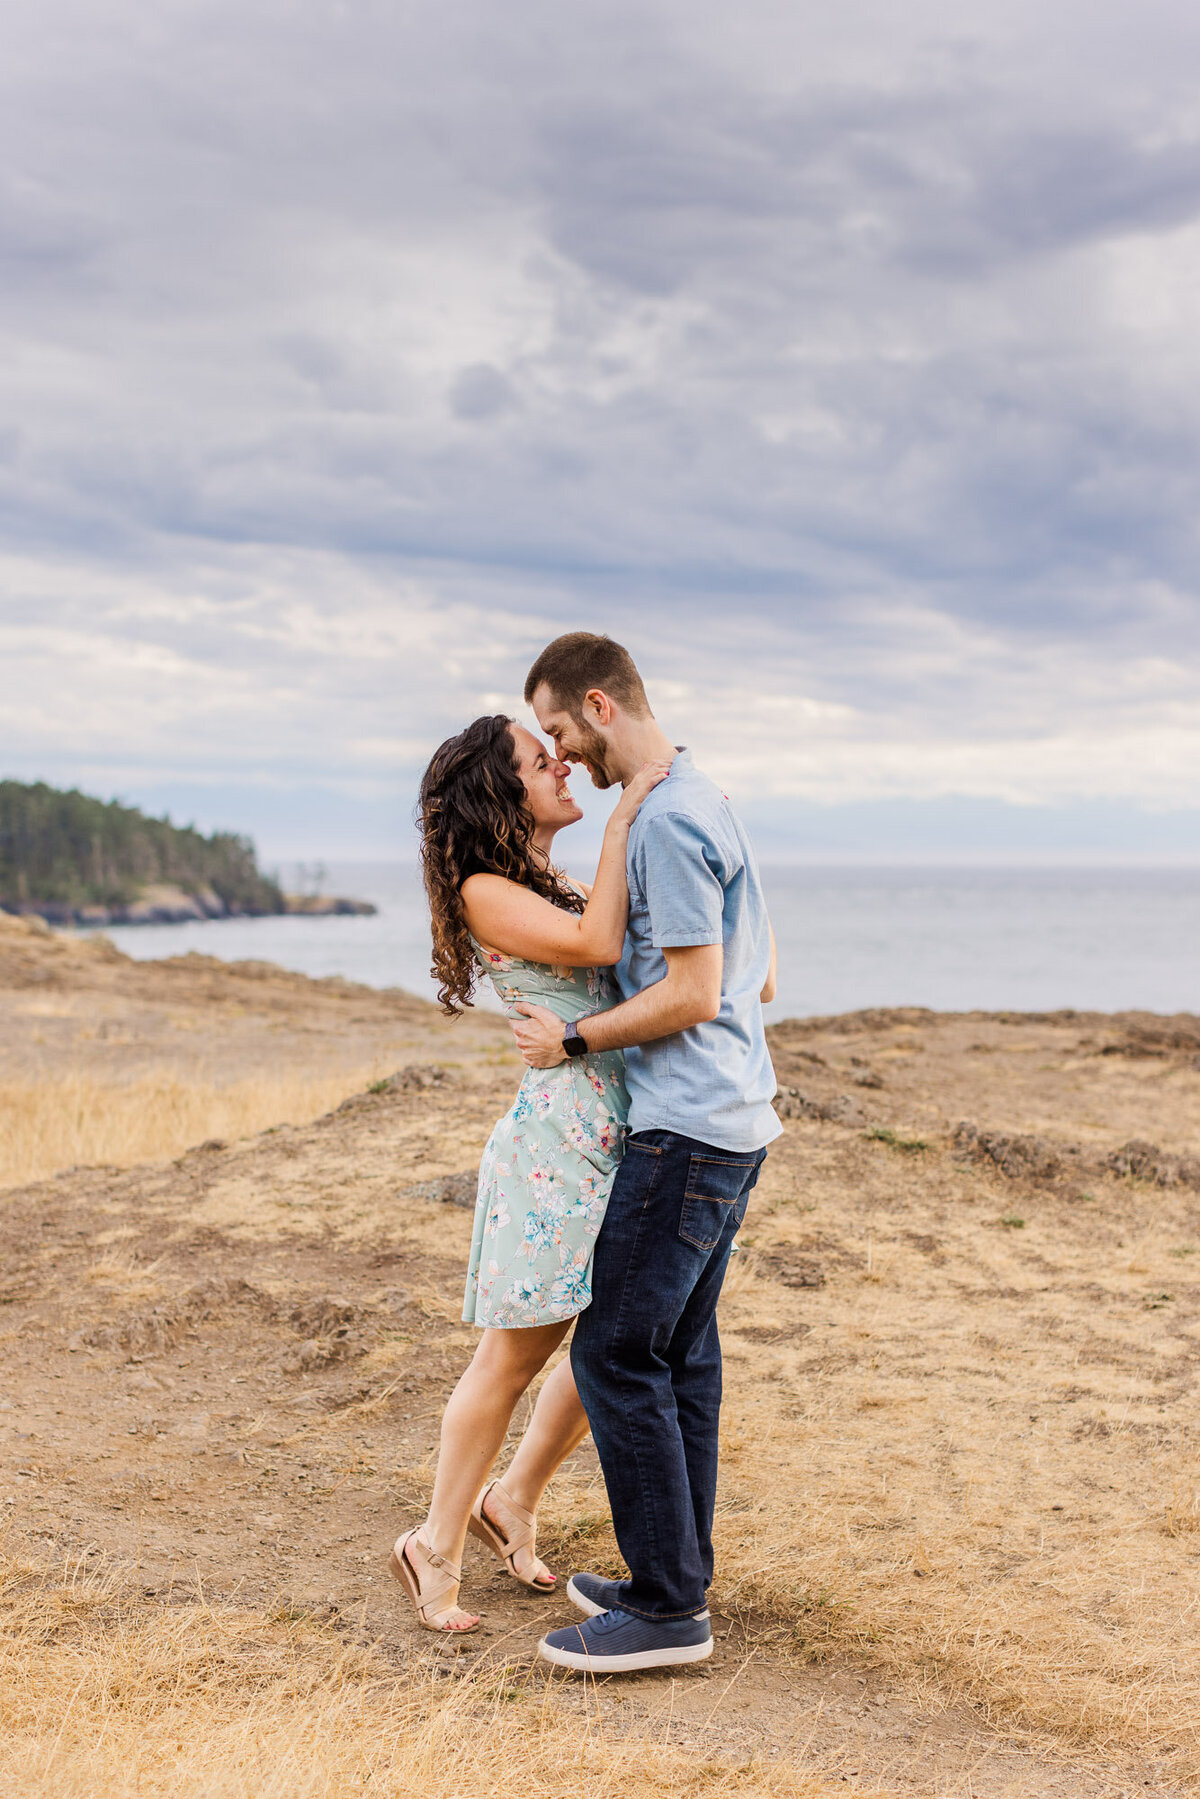 PNW Puget Sound engagement photos at Rosario Beach Deception Pass near Seattle colorful romantic photo by Joanna Monger Photography